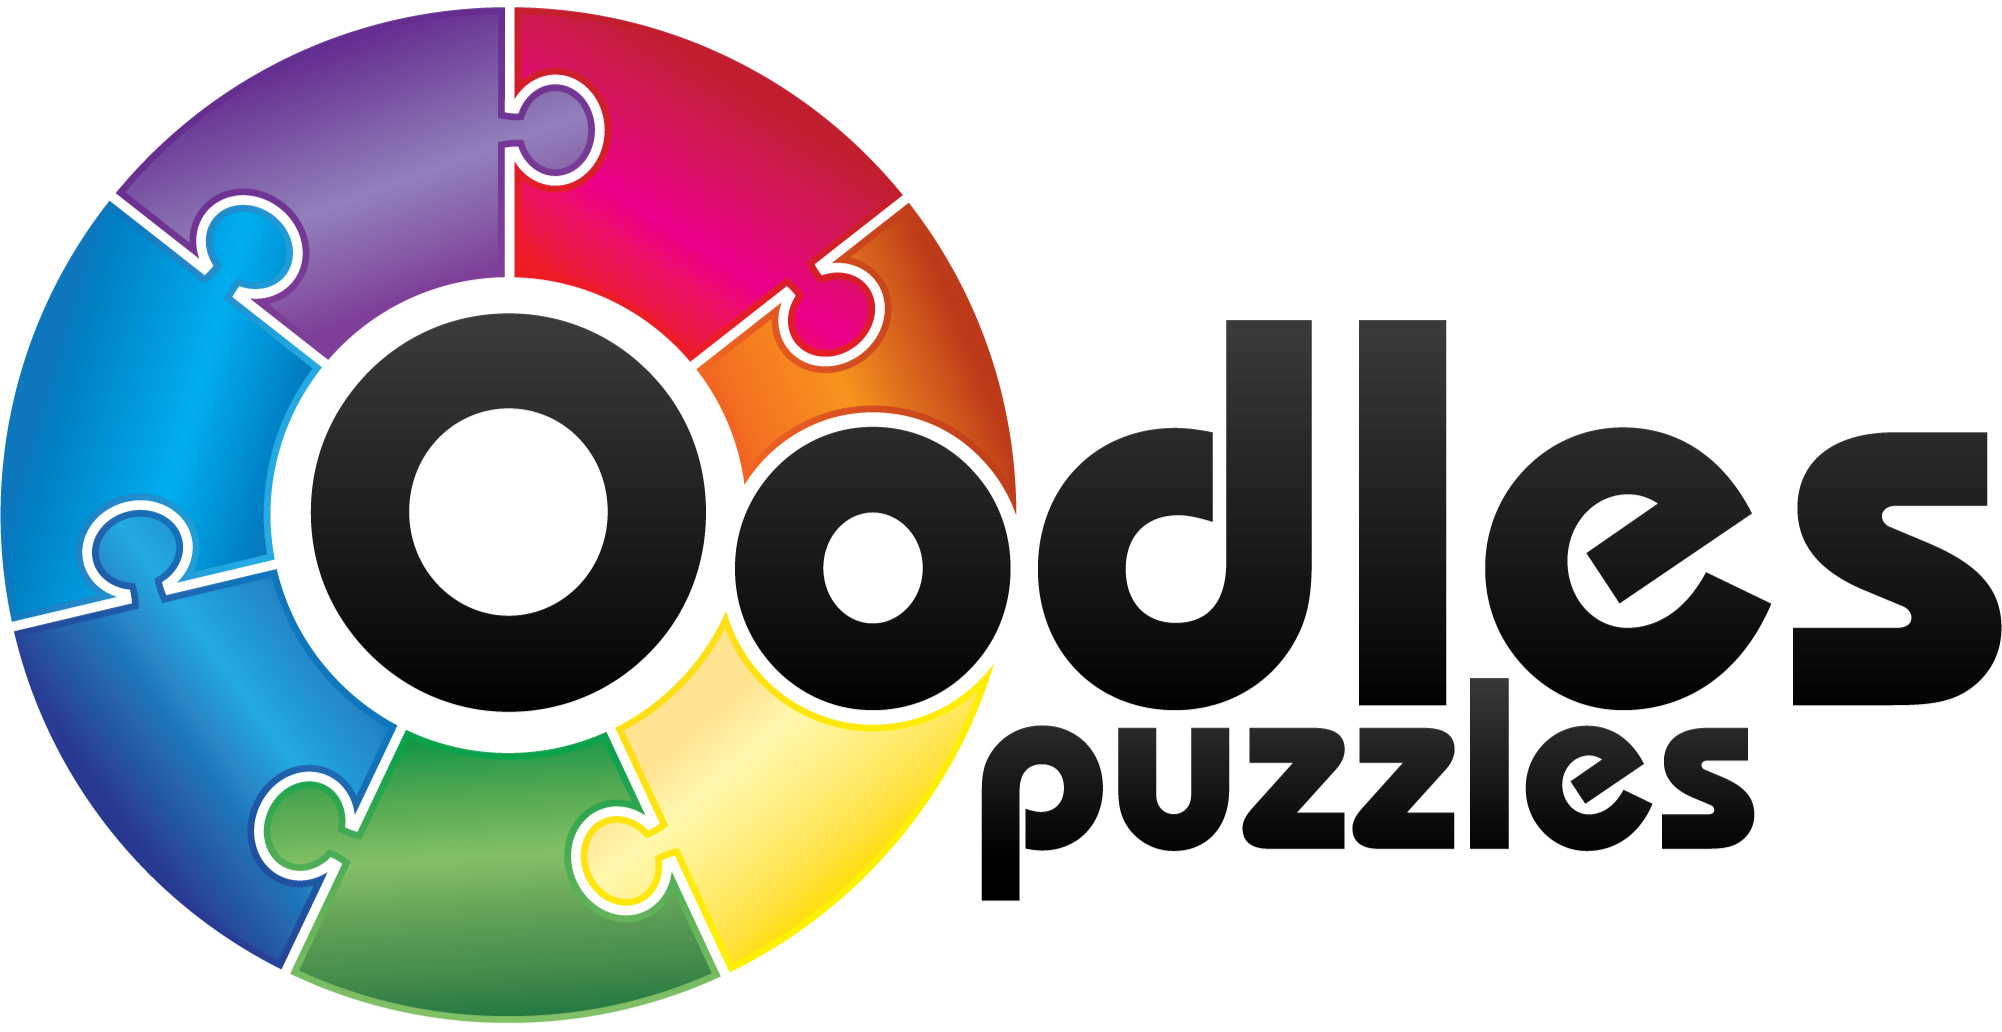 'Oodles Puzzles' Brand